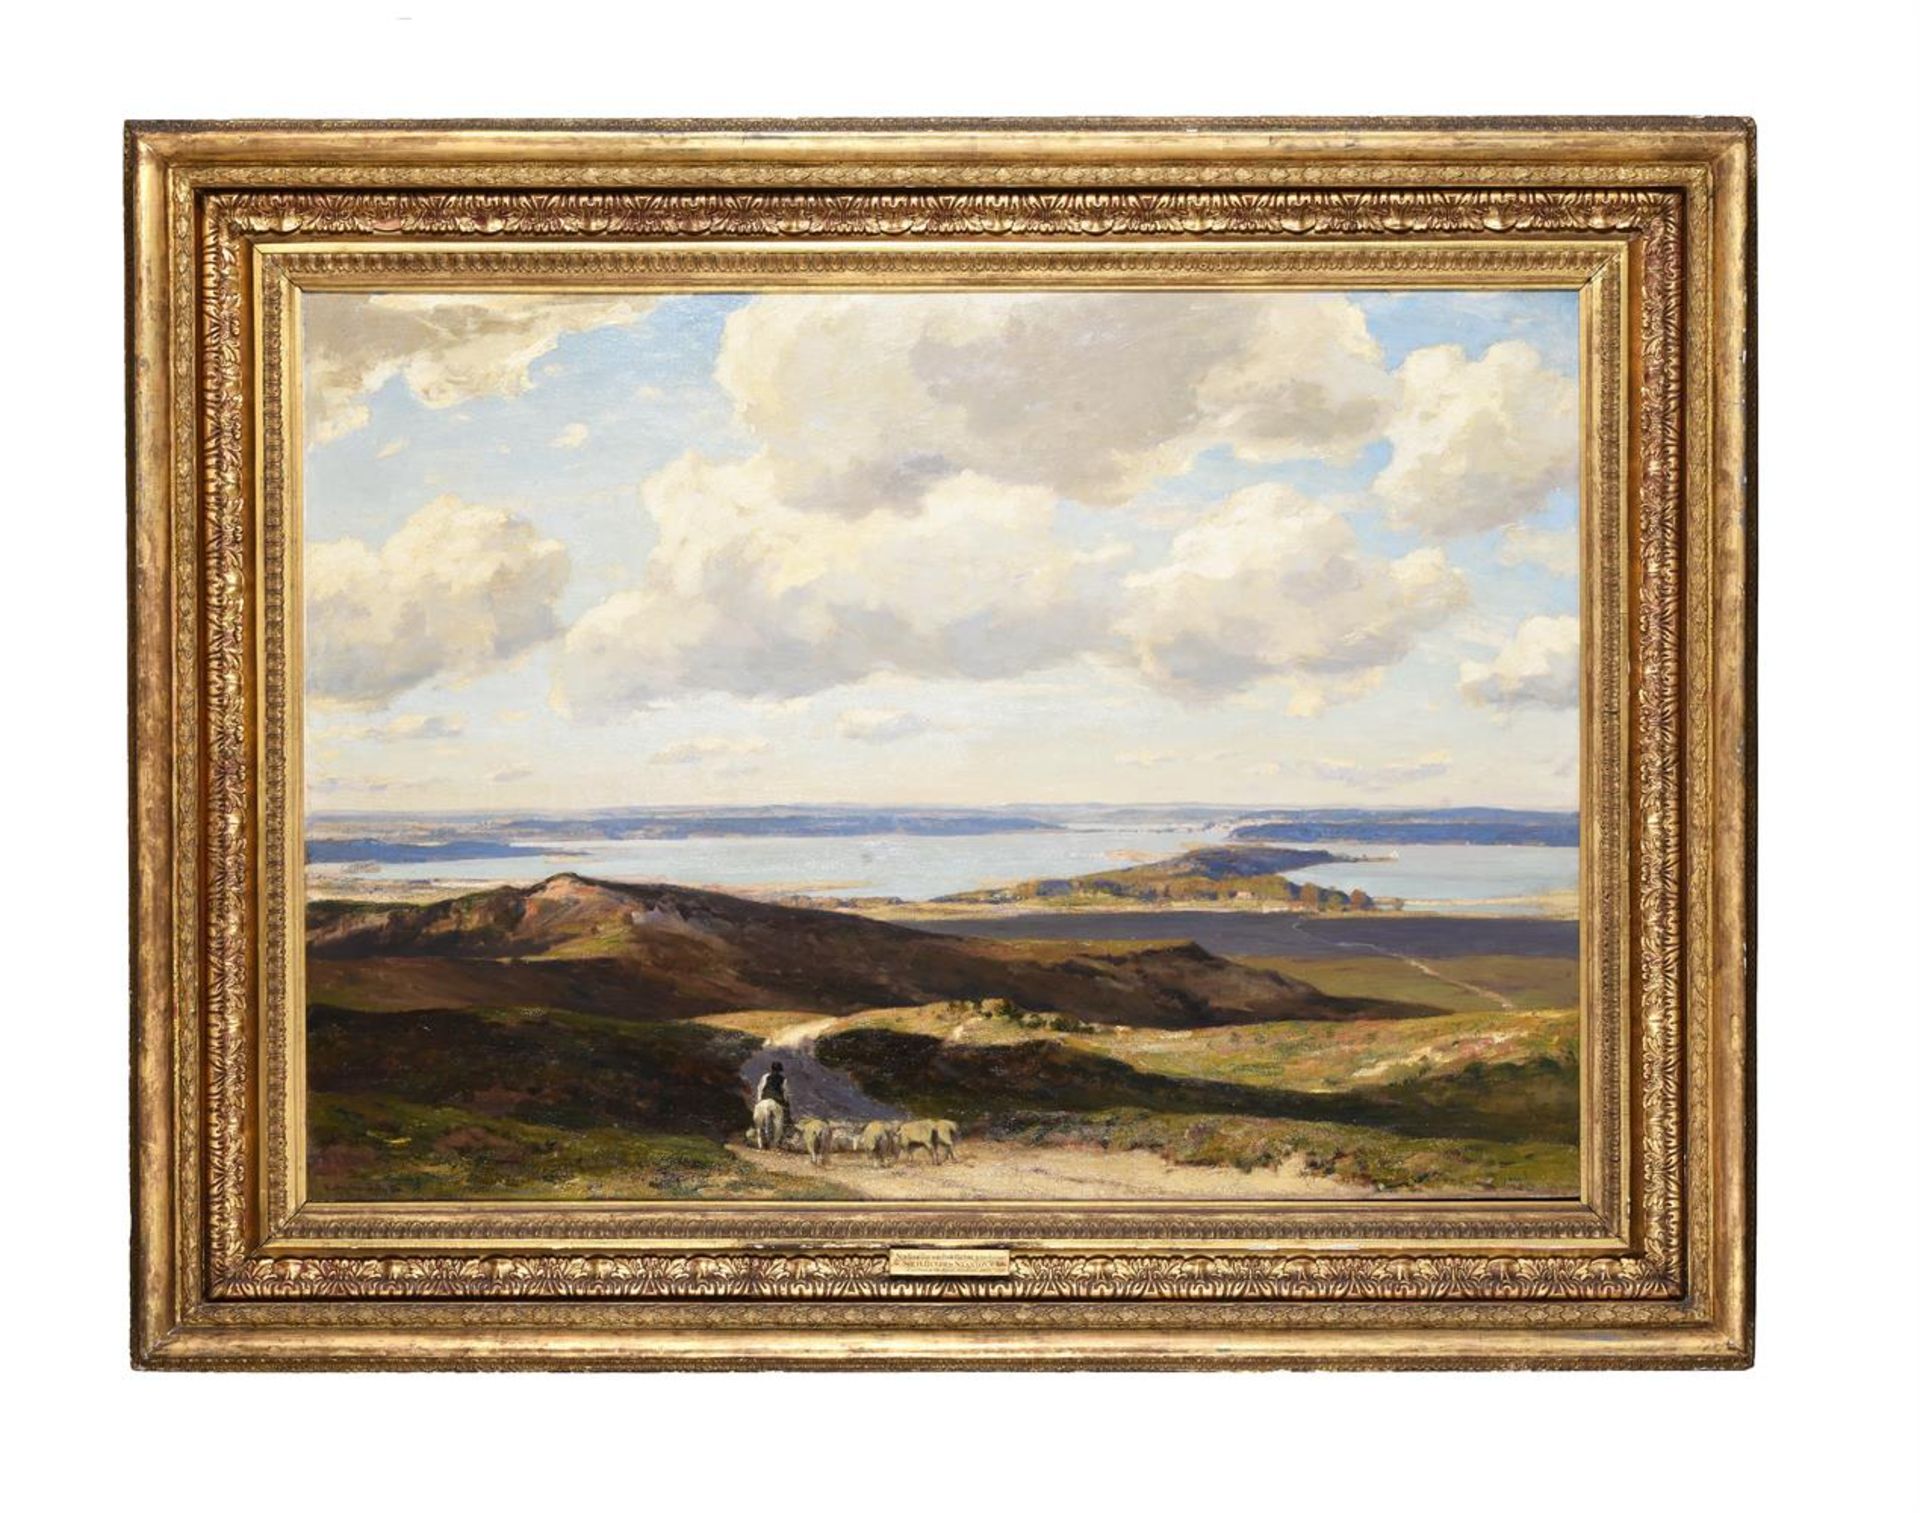 SIR HERBERT HUGHES-STANTON (BRITISH 1870-1937), STUDLAND BAY WITH POOLE HARBOUR IN THE DISTANCE - Image 2 of 5